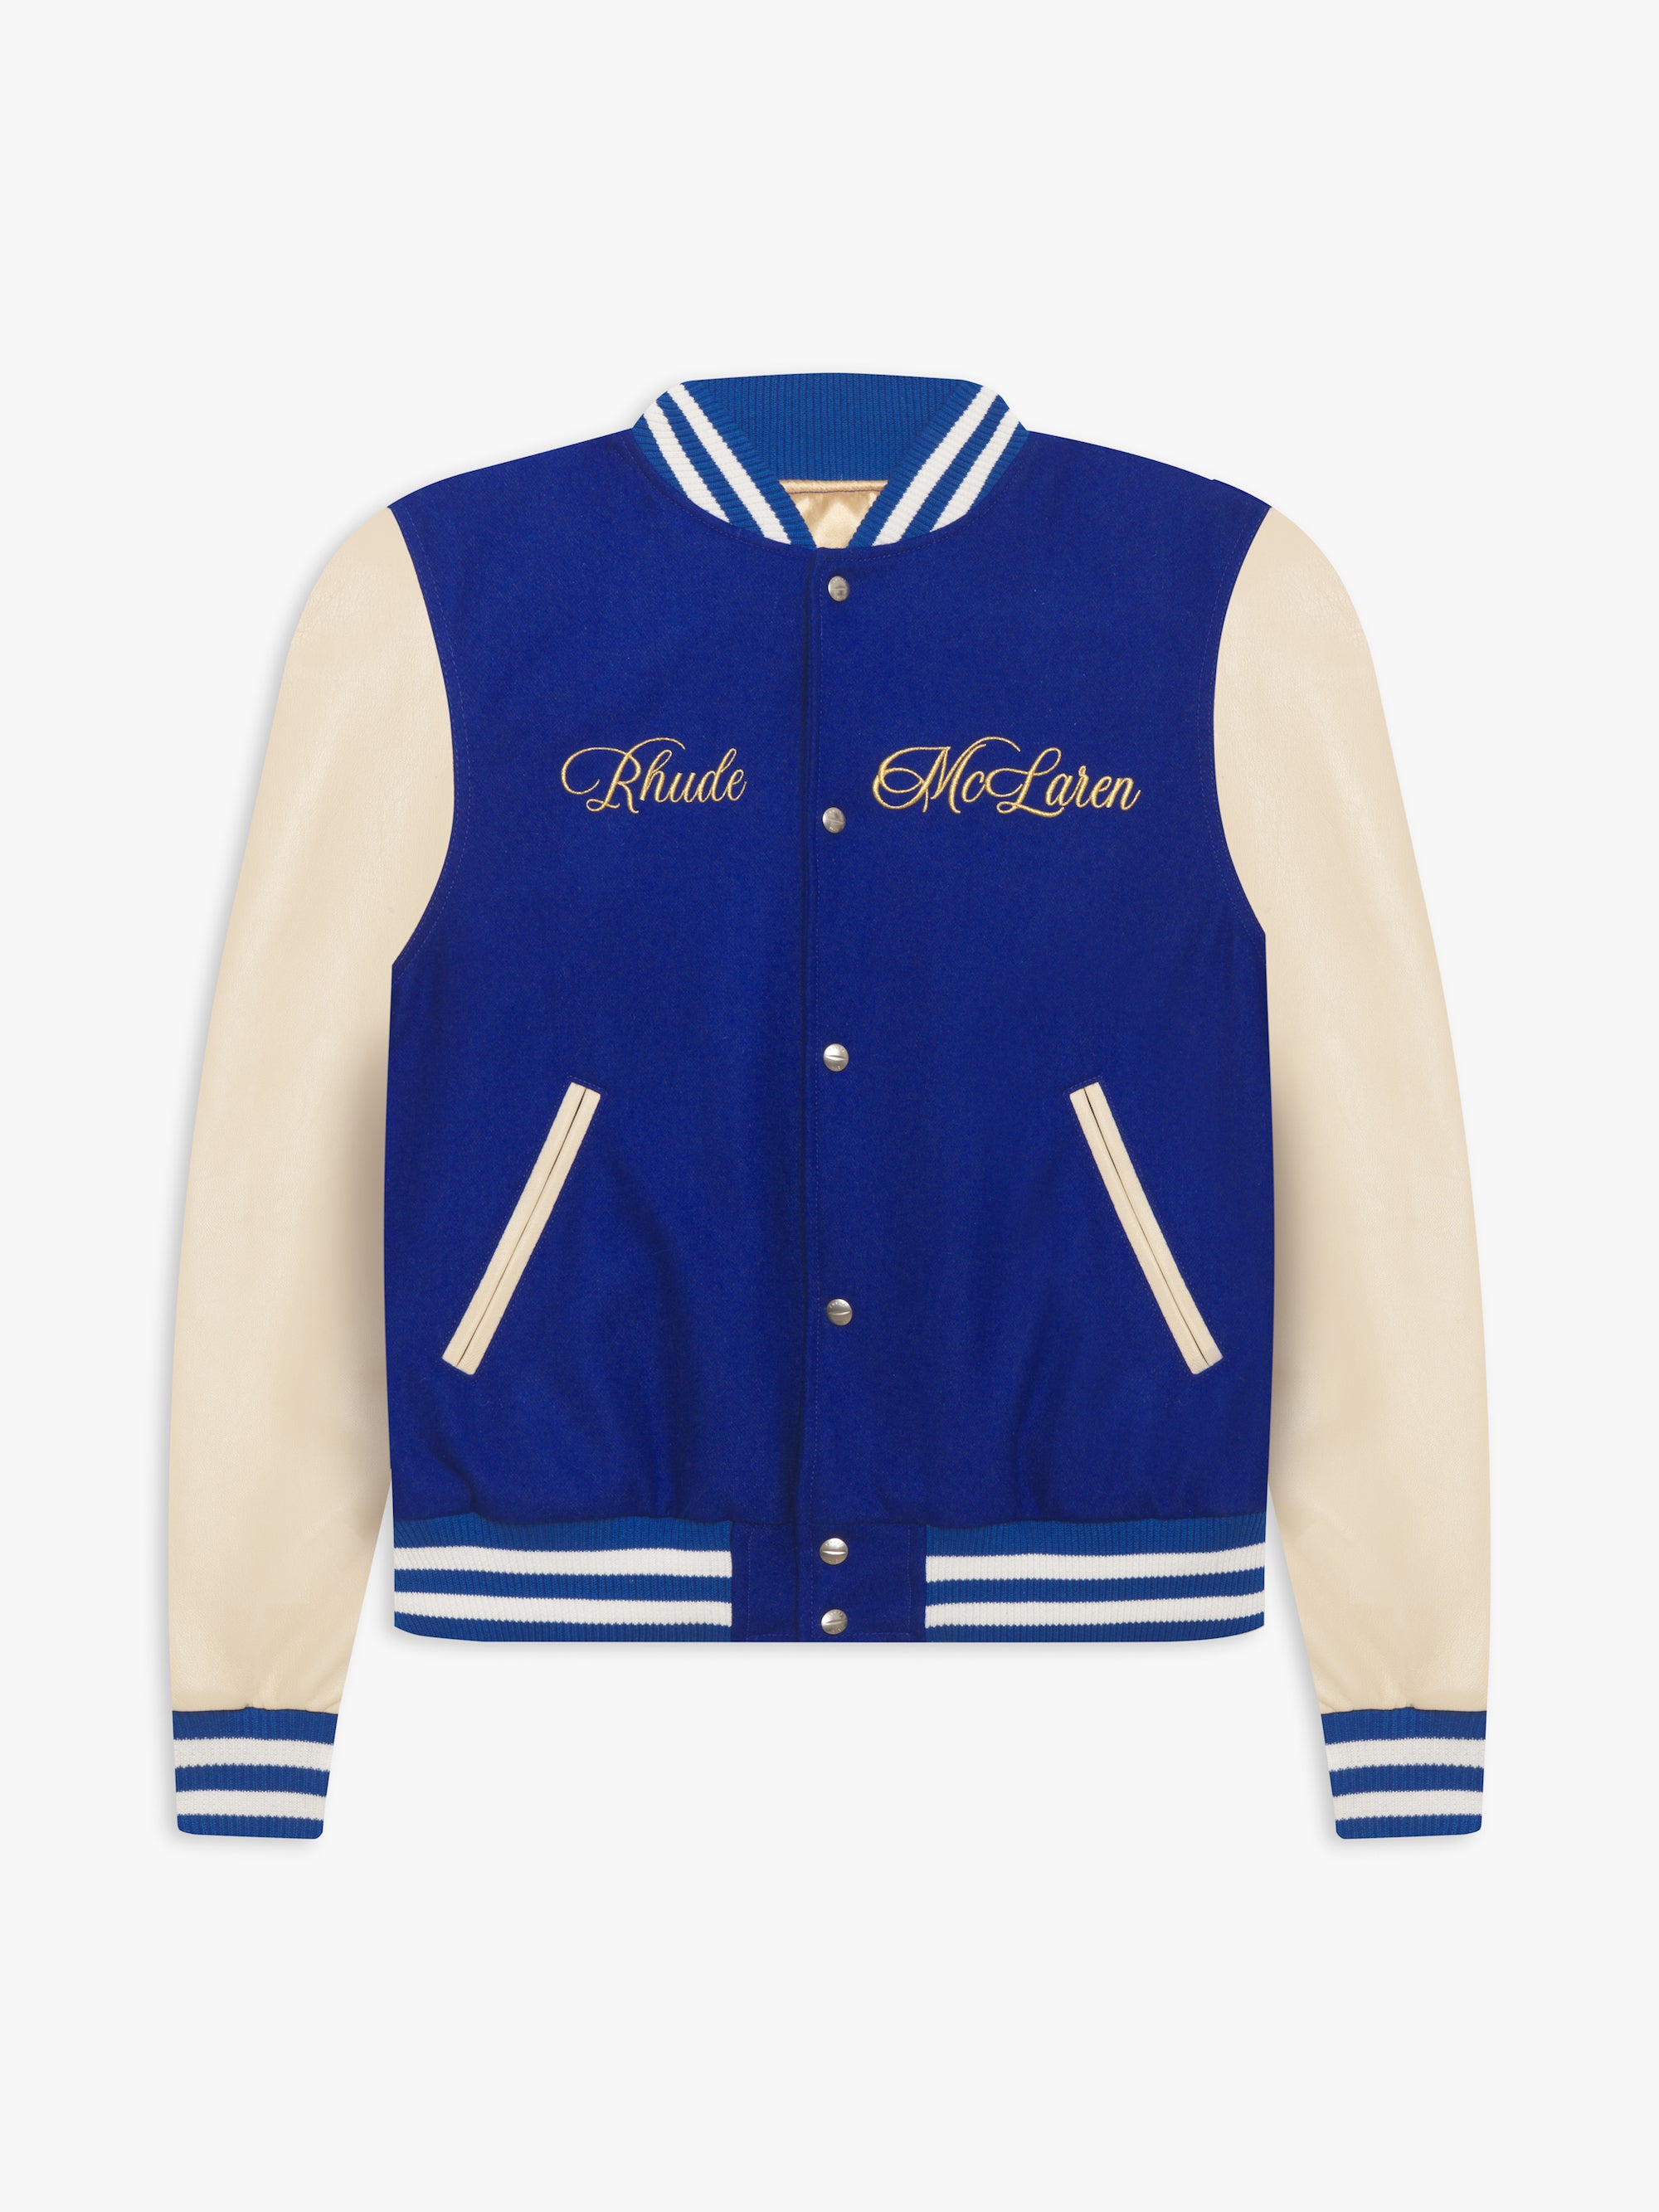 Why the Varsity Jacket Is a Recent Fashion Favorite - Coveteur